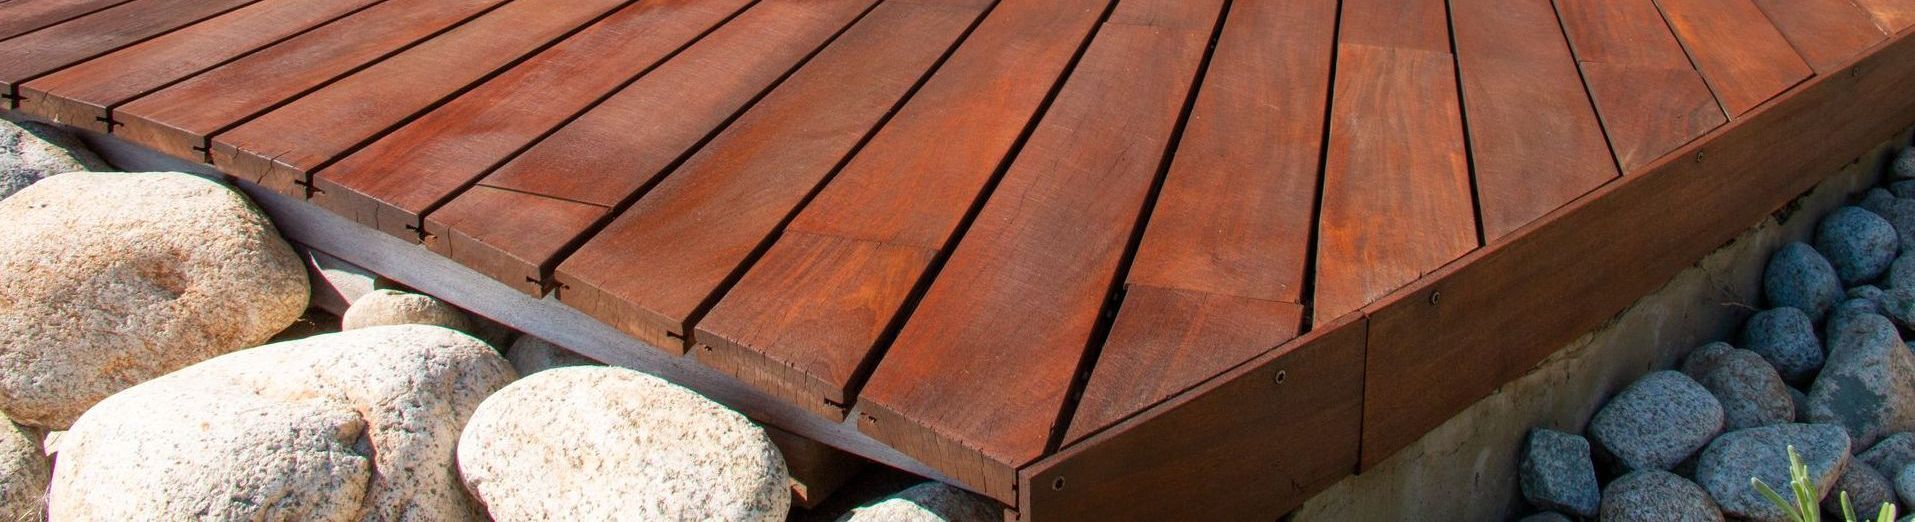 A wooden deck with a circular design is surrounded by rocks.